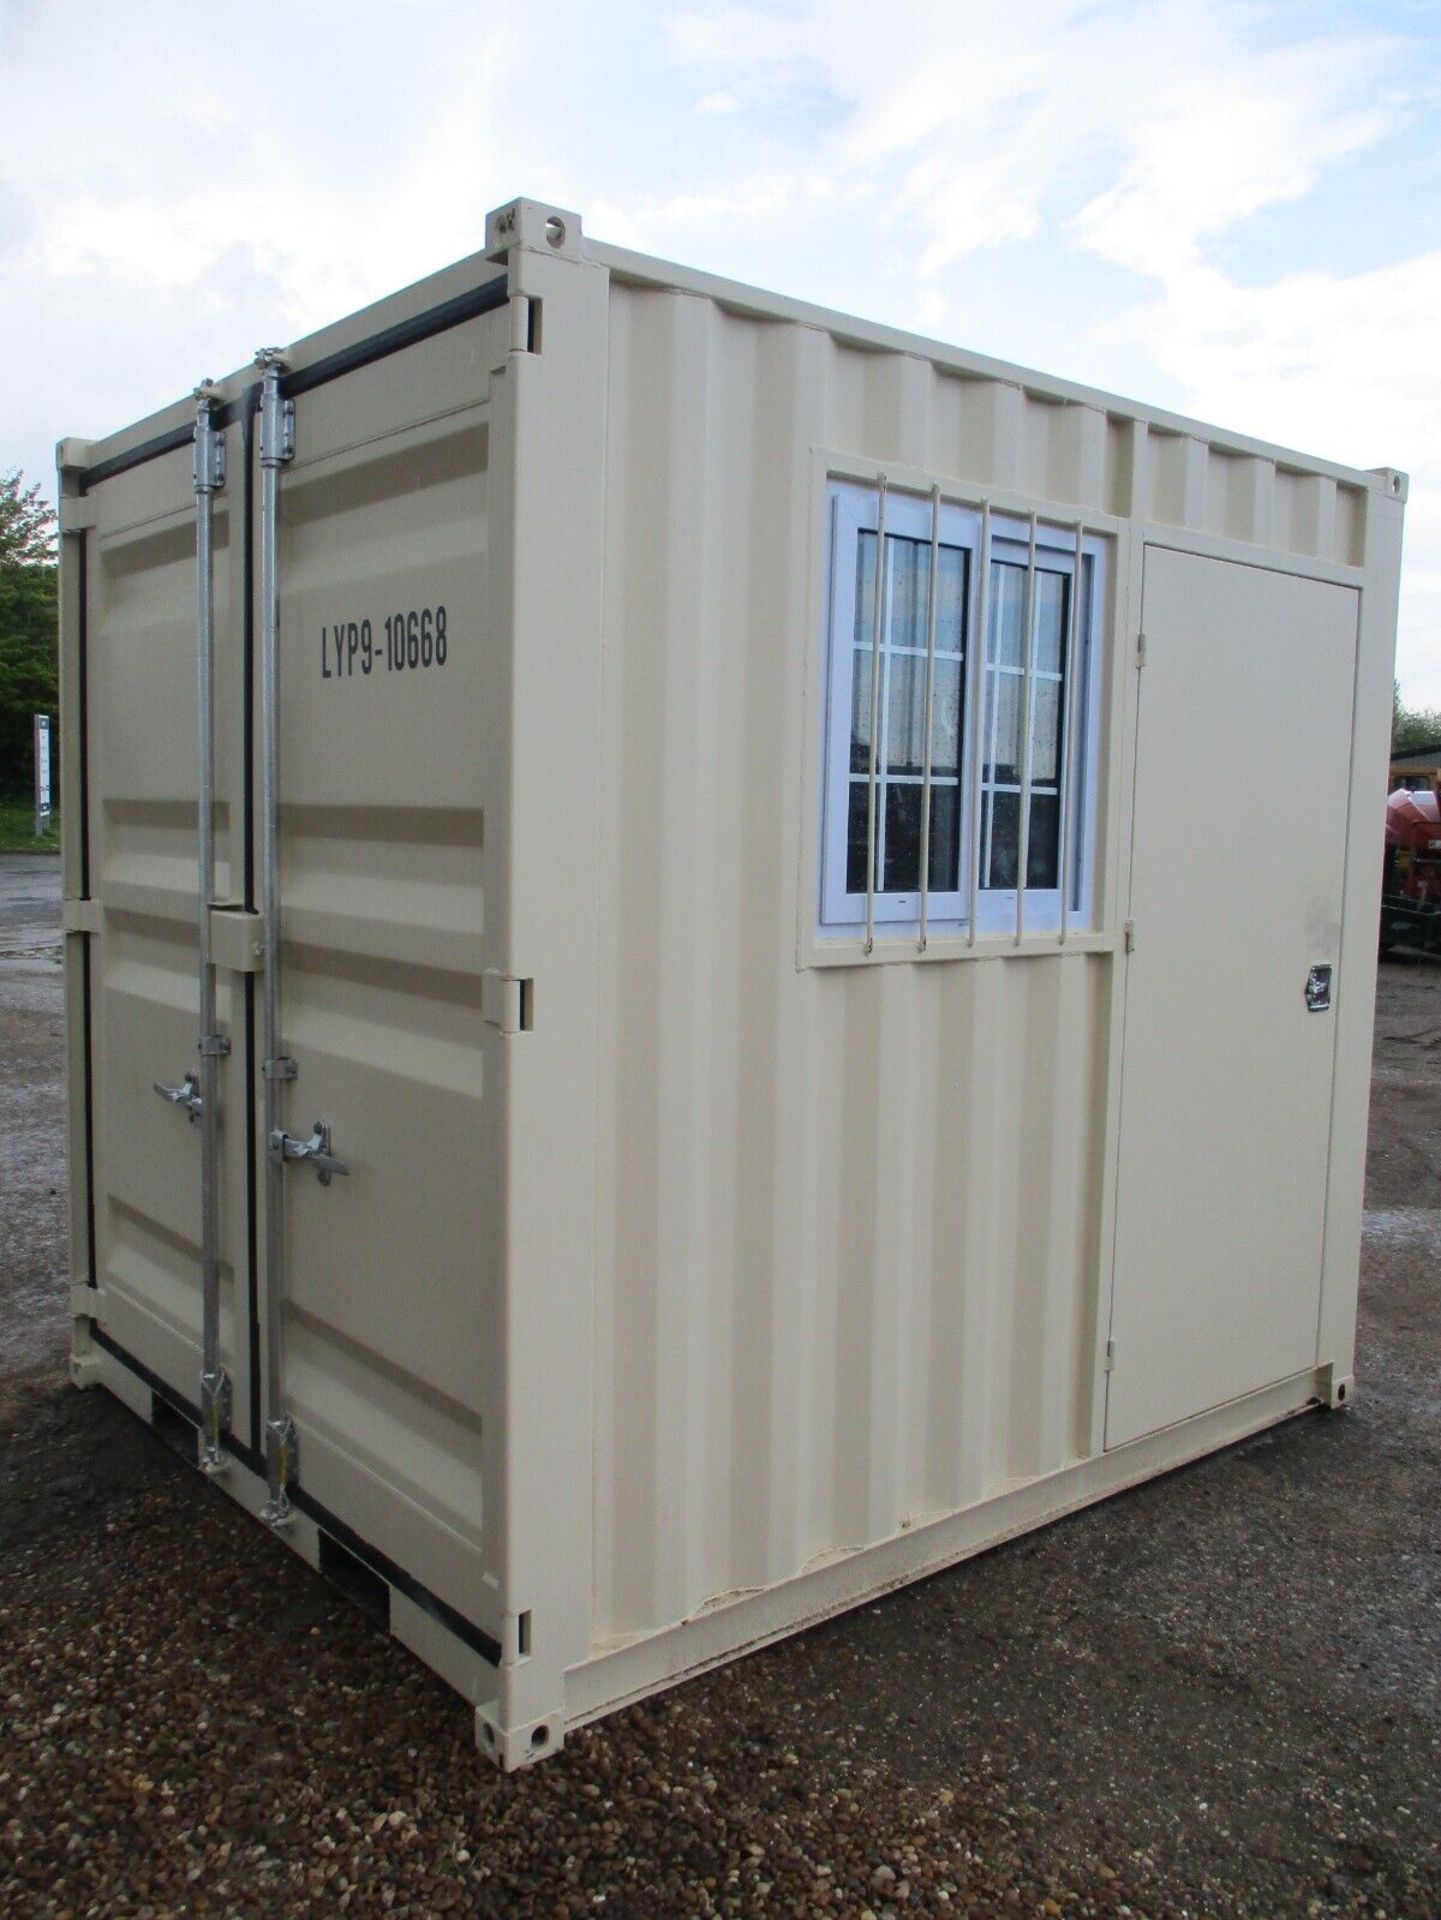 NEW 9 FOOT SECURE SHIPPING CONTAINER 10 HOME OFFICE GARDEN ROOM GARAGE SHED - Image 2 of 7